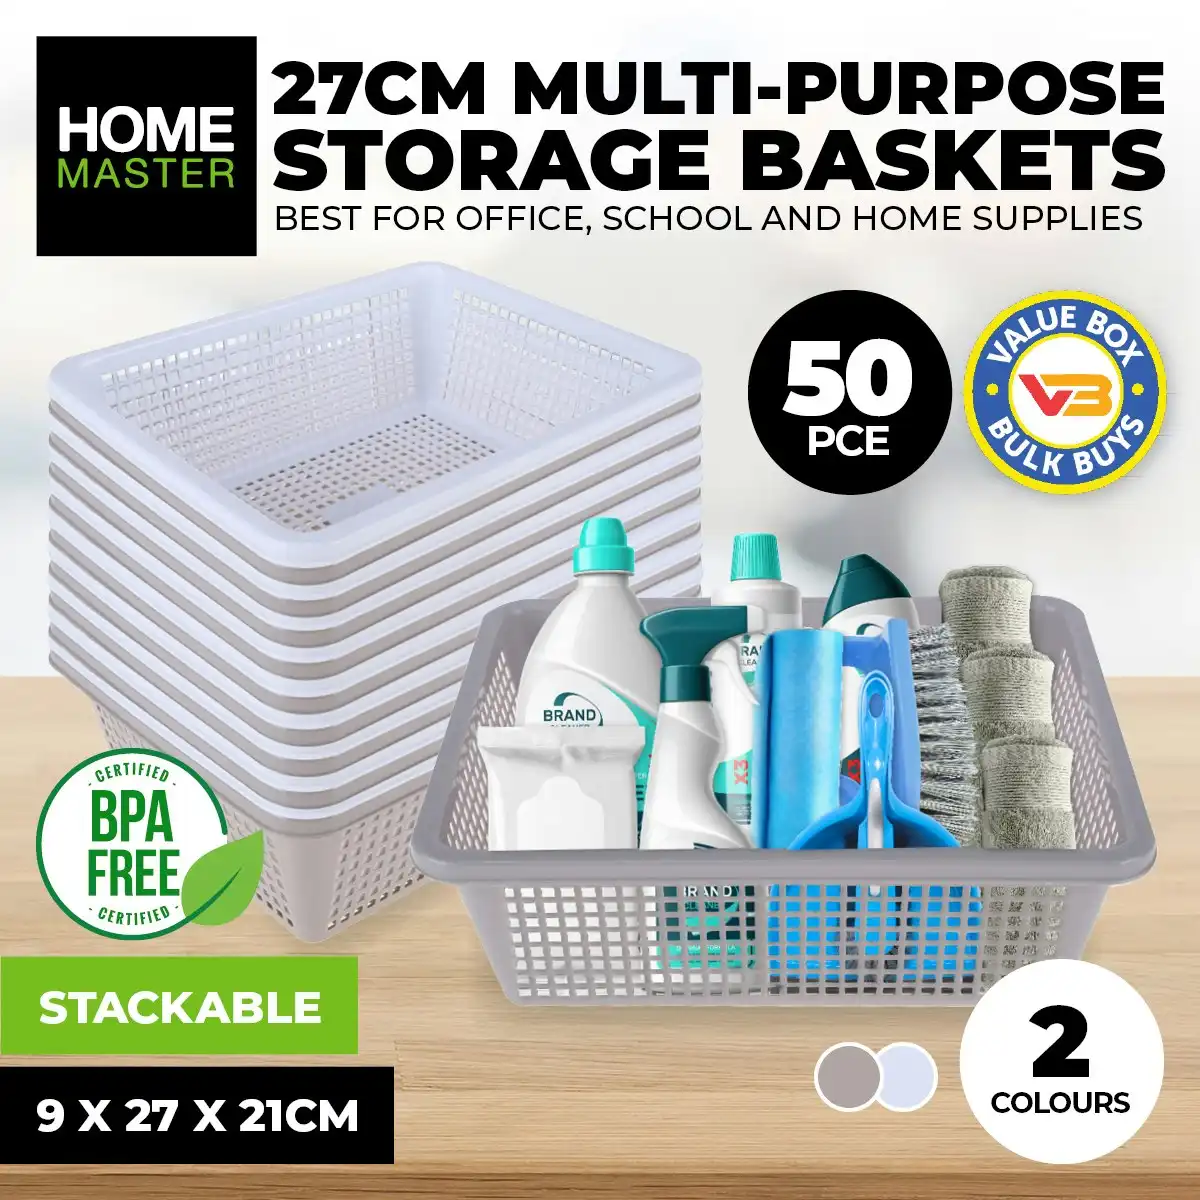 Home Master 50PCE Storage Baskets Stackable Multipurpose Space Saving 27cm